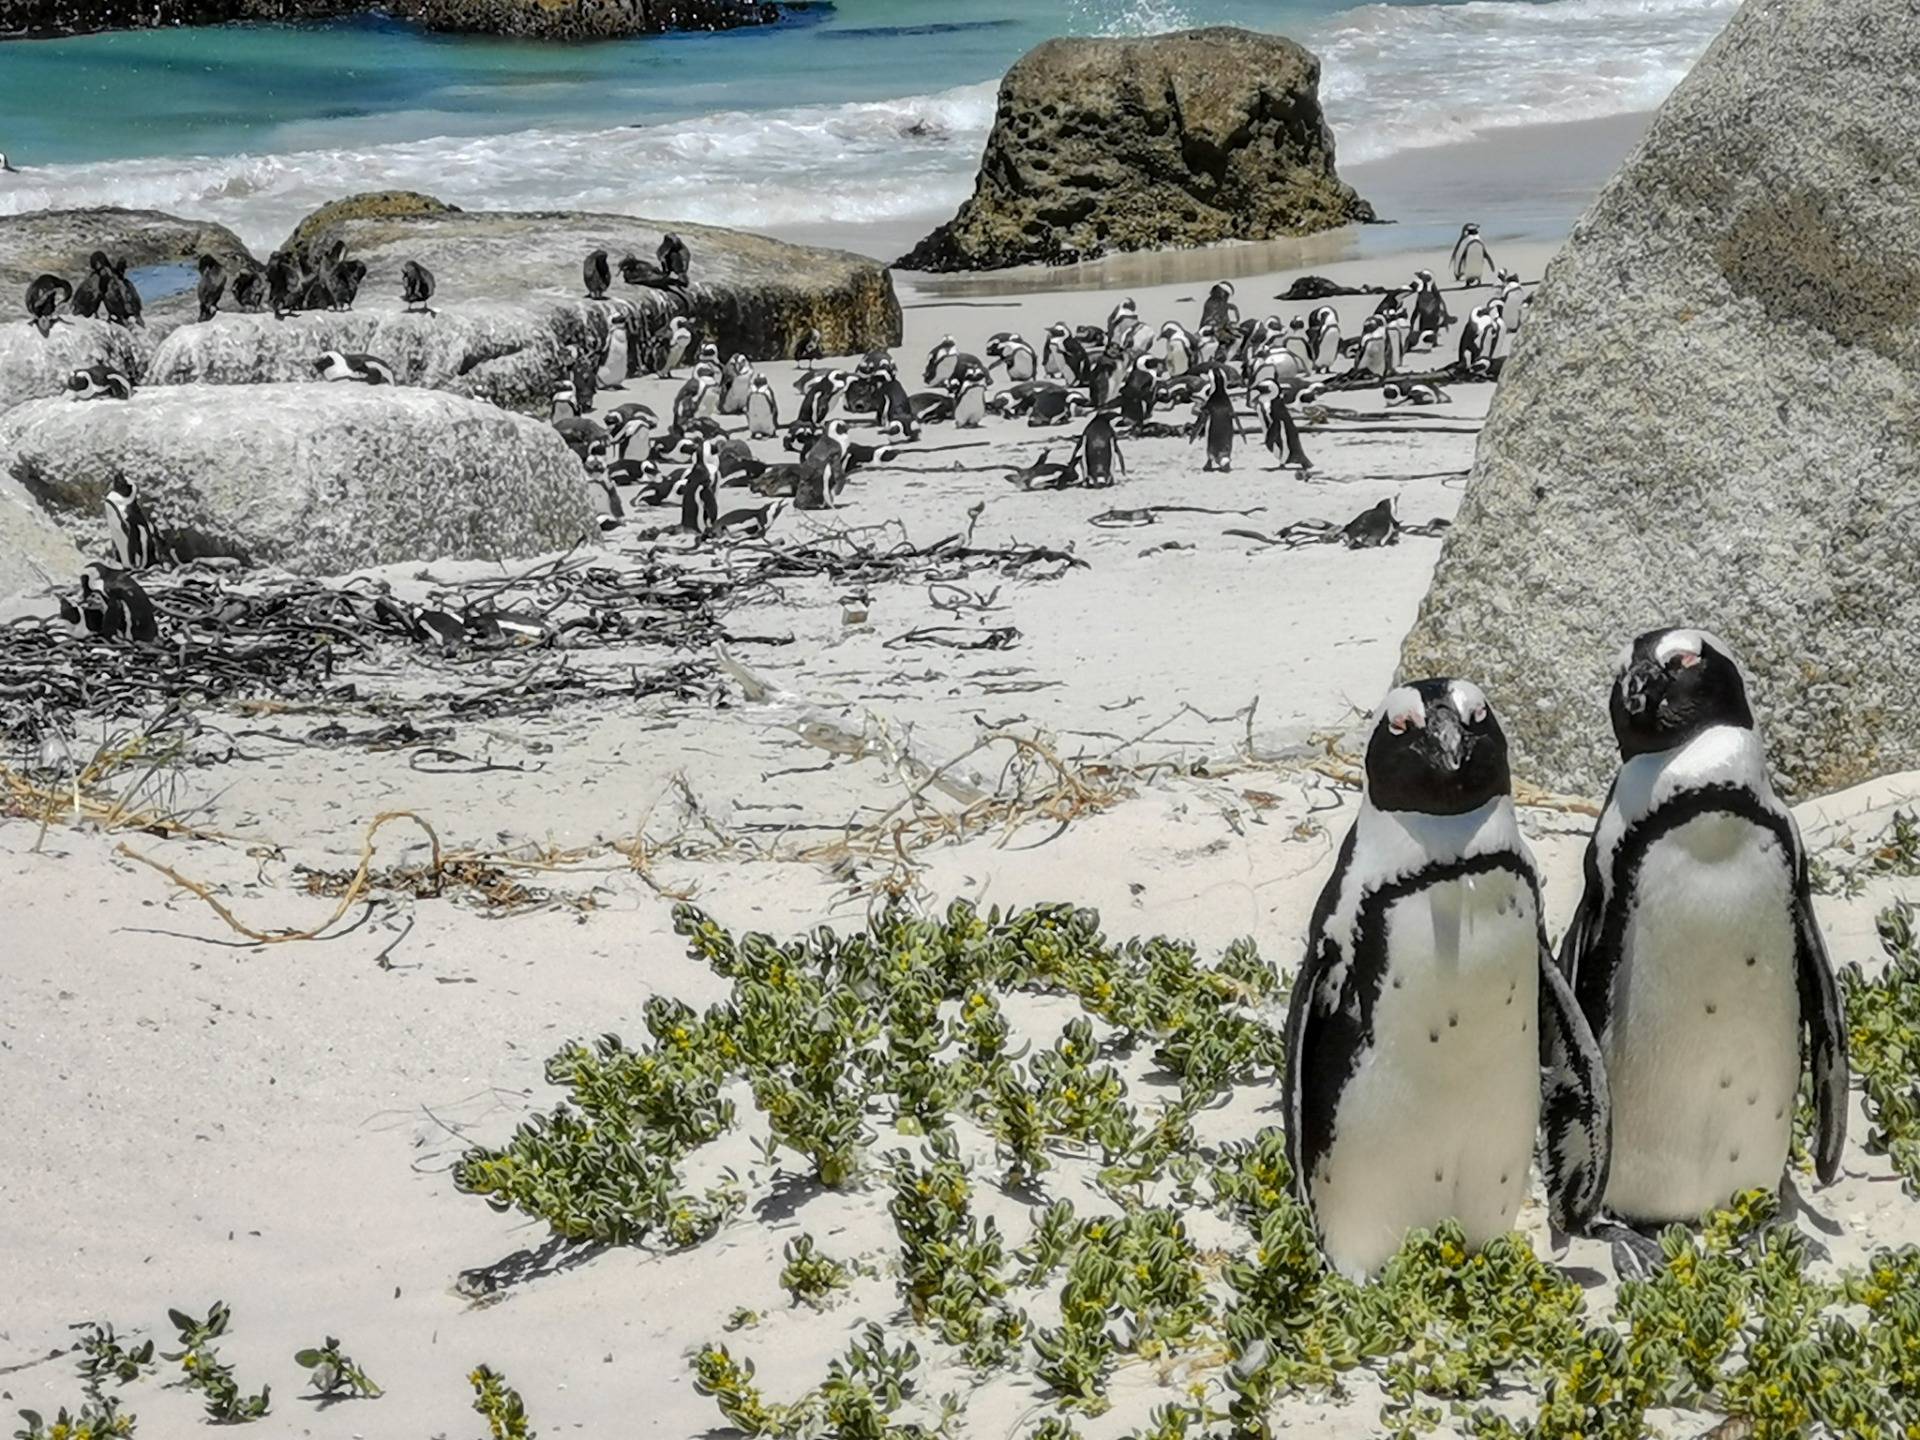 Penguins at Boulders Beach, Cape Town - South Africa.